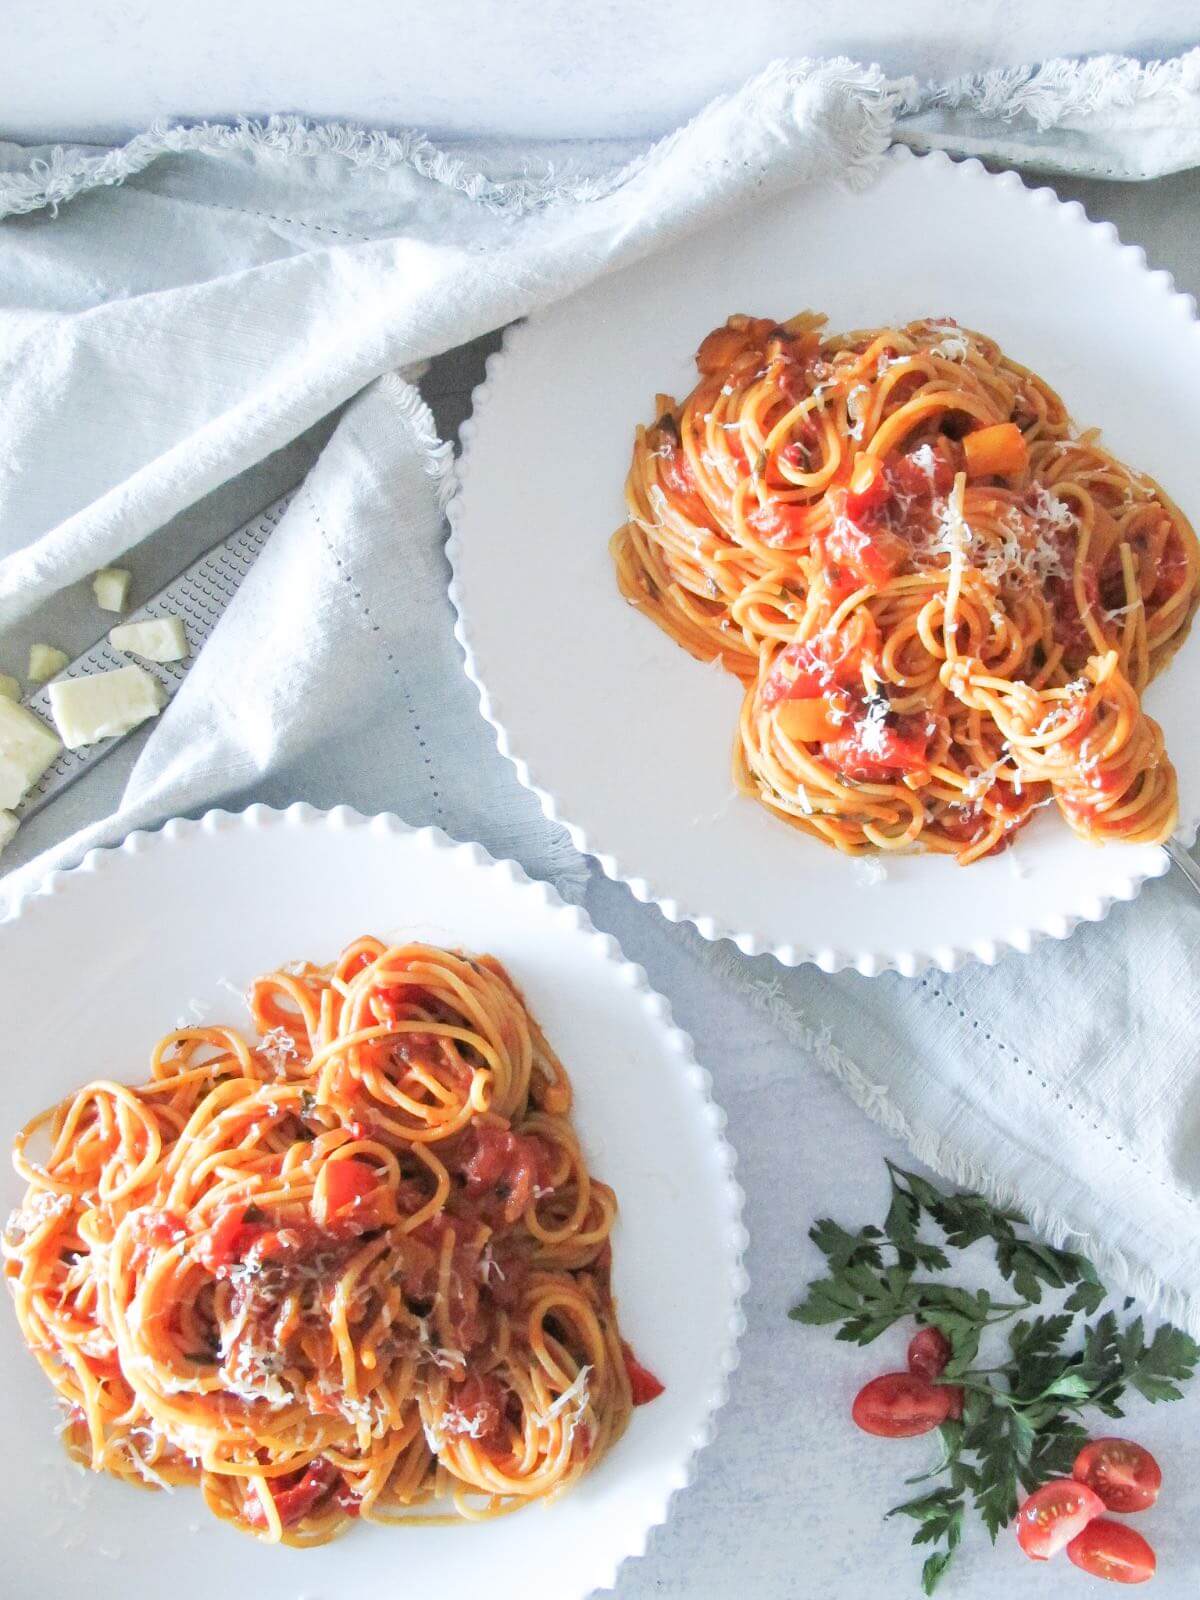 two plates of spaghetti with spicy tomato sauce on a linen napkin.